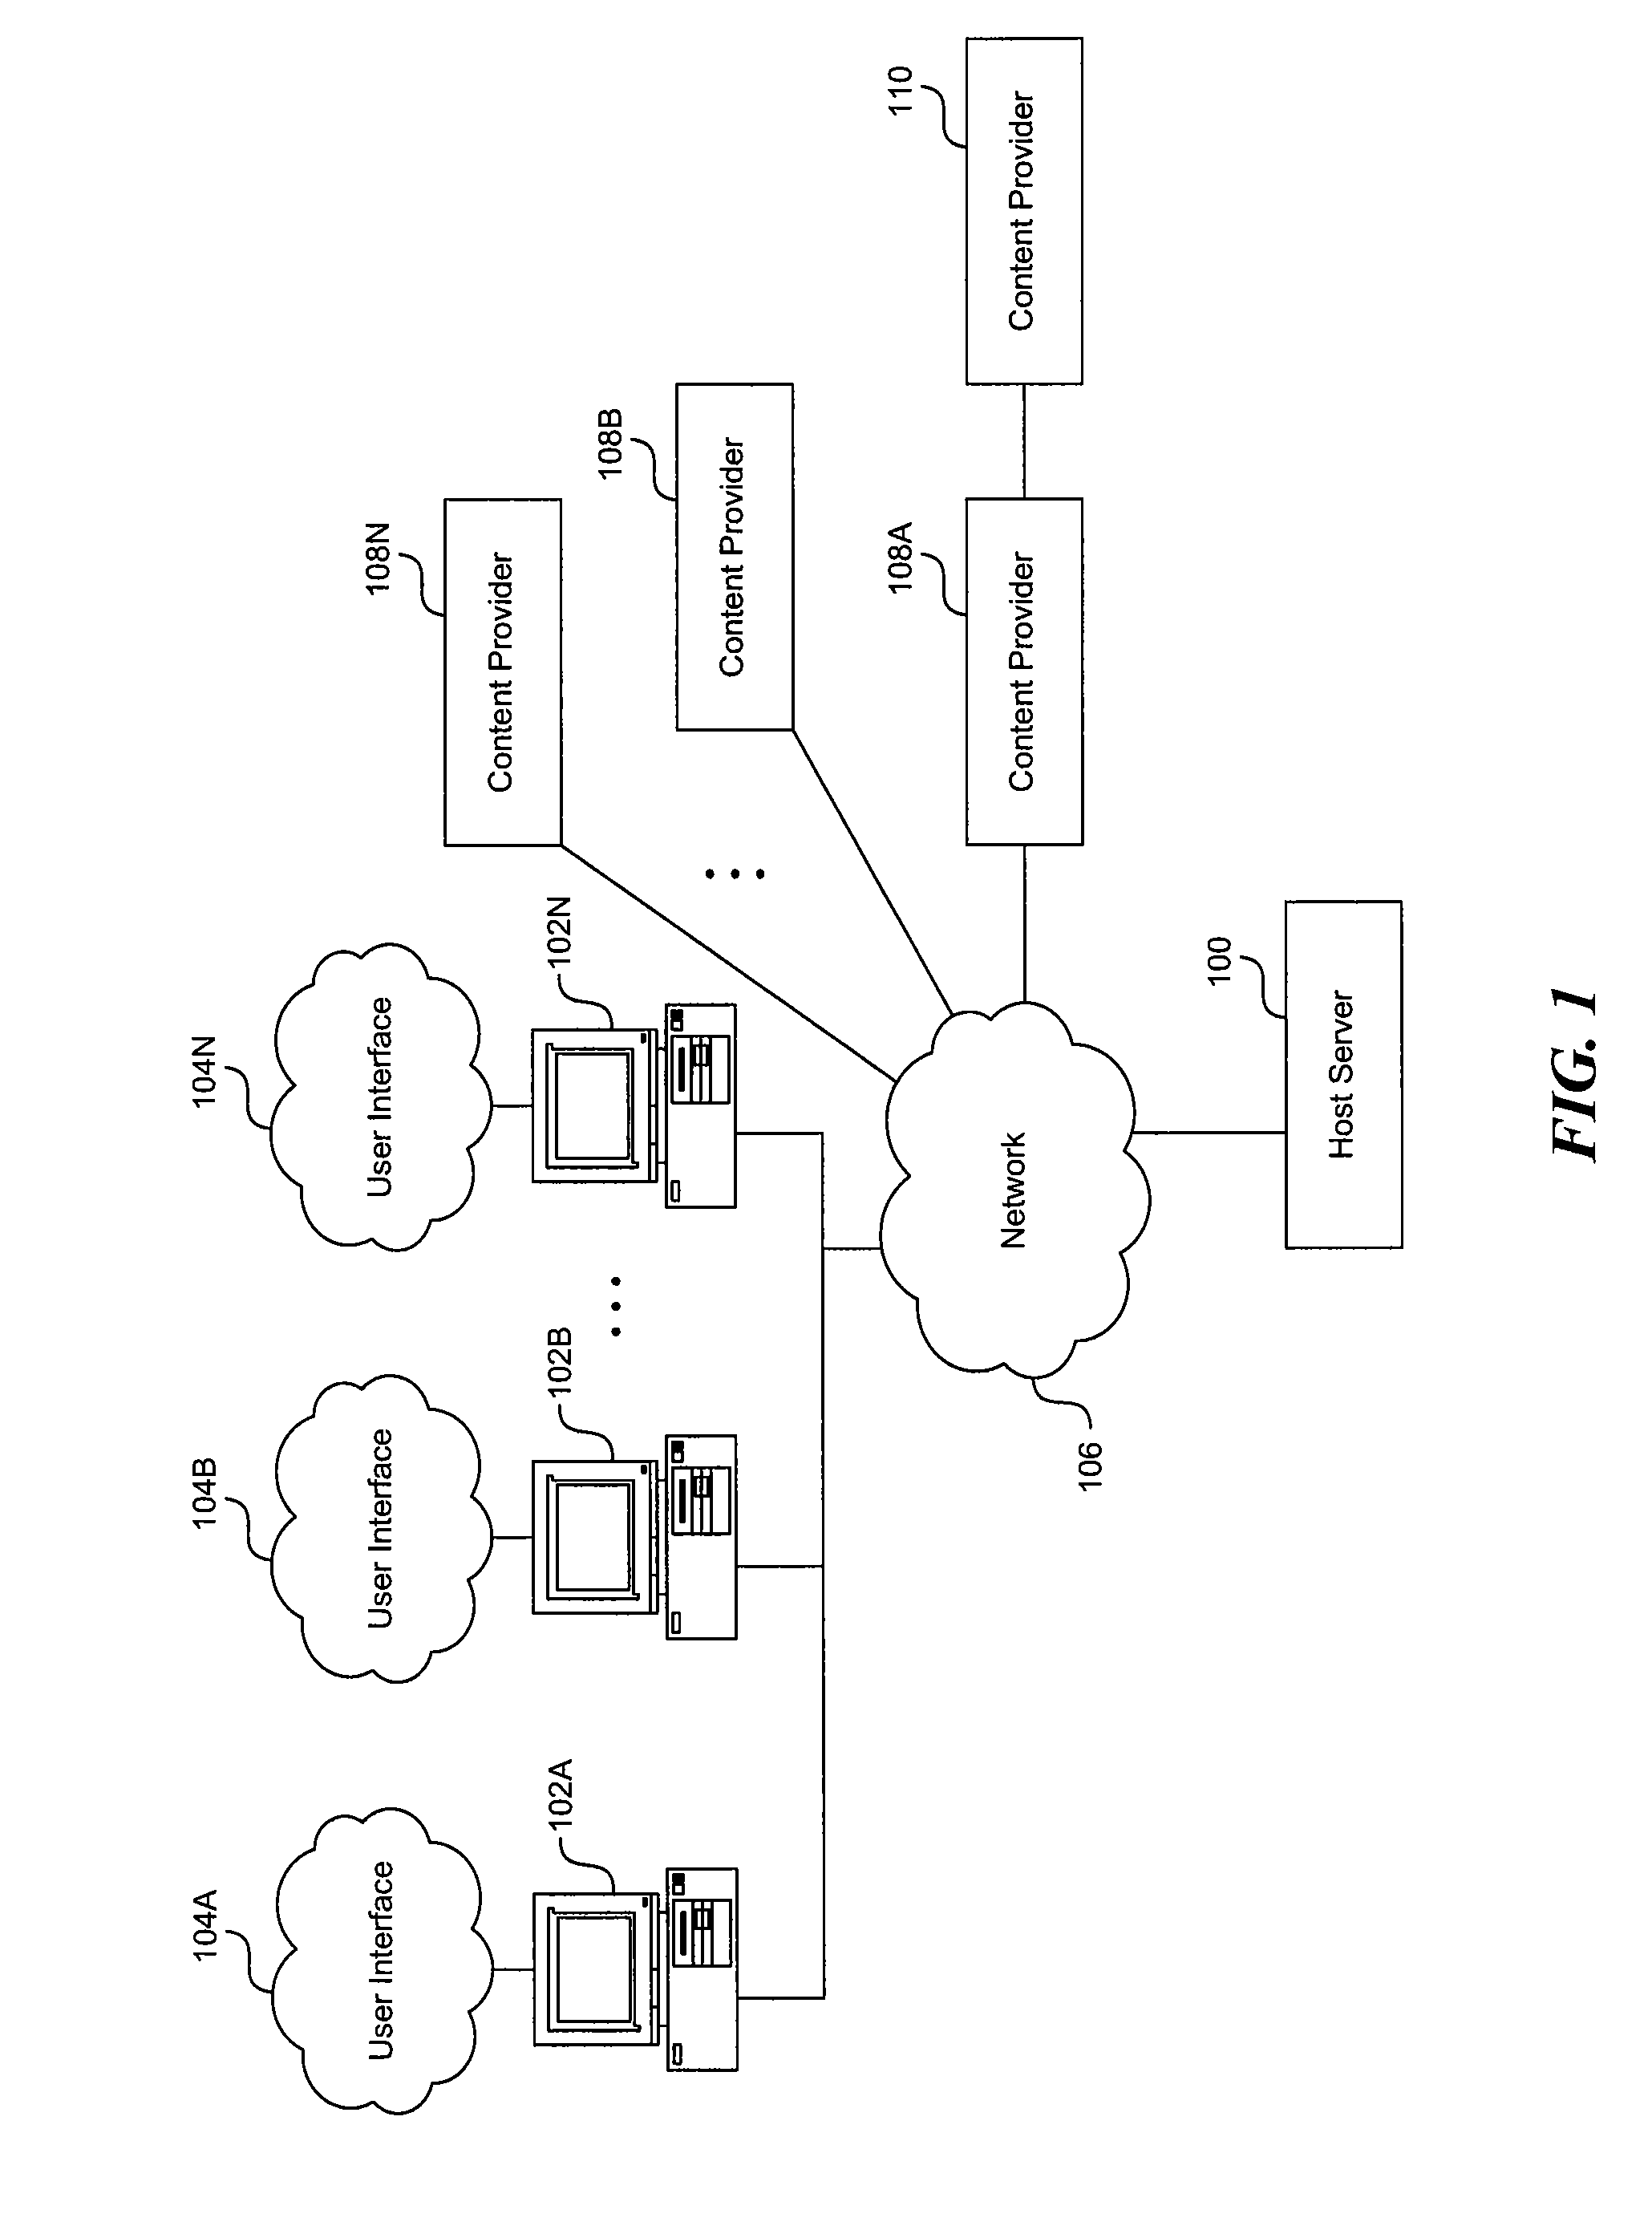 System and Method of a Knowledge Management and Networking Environment